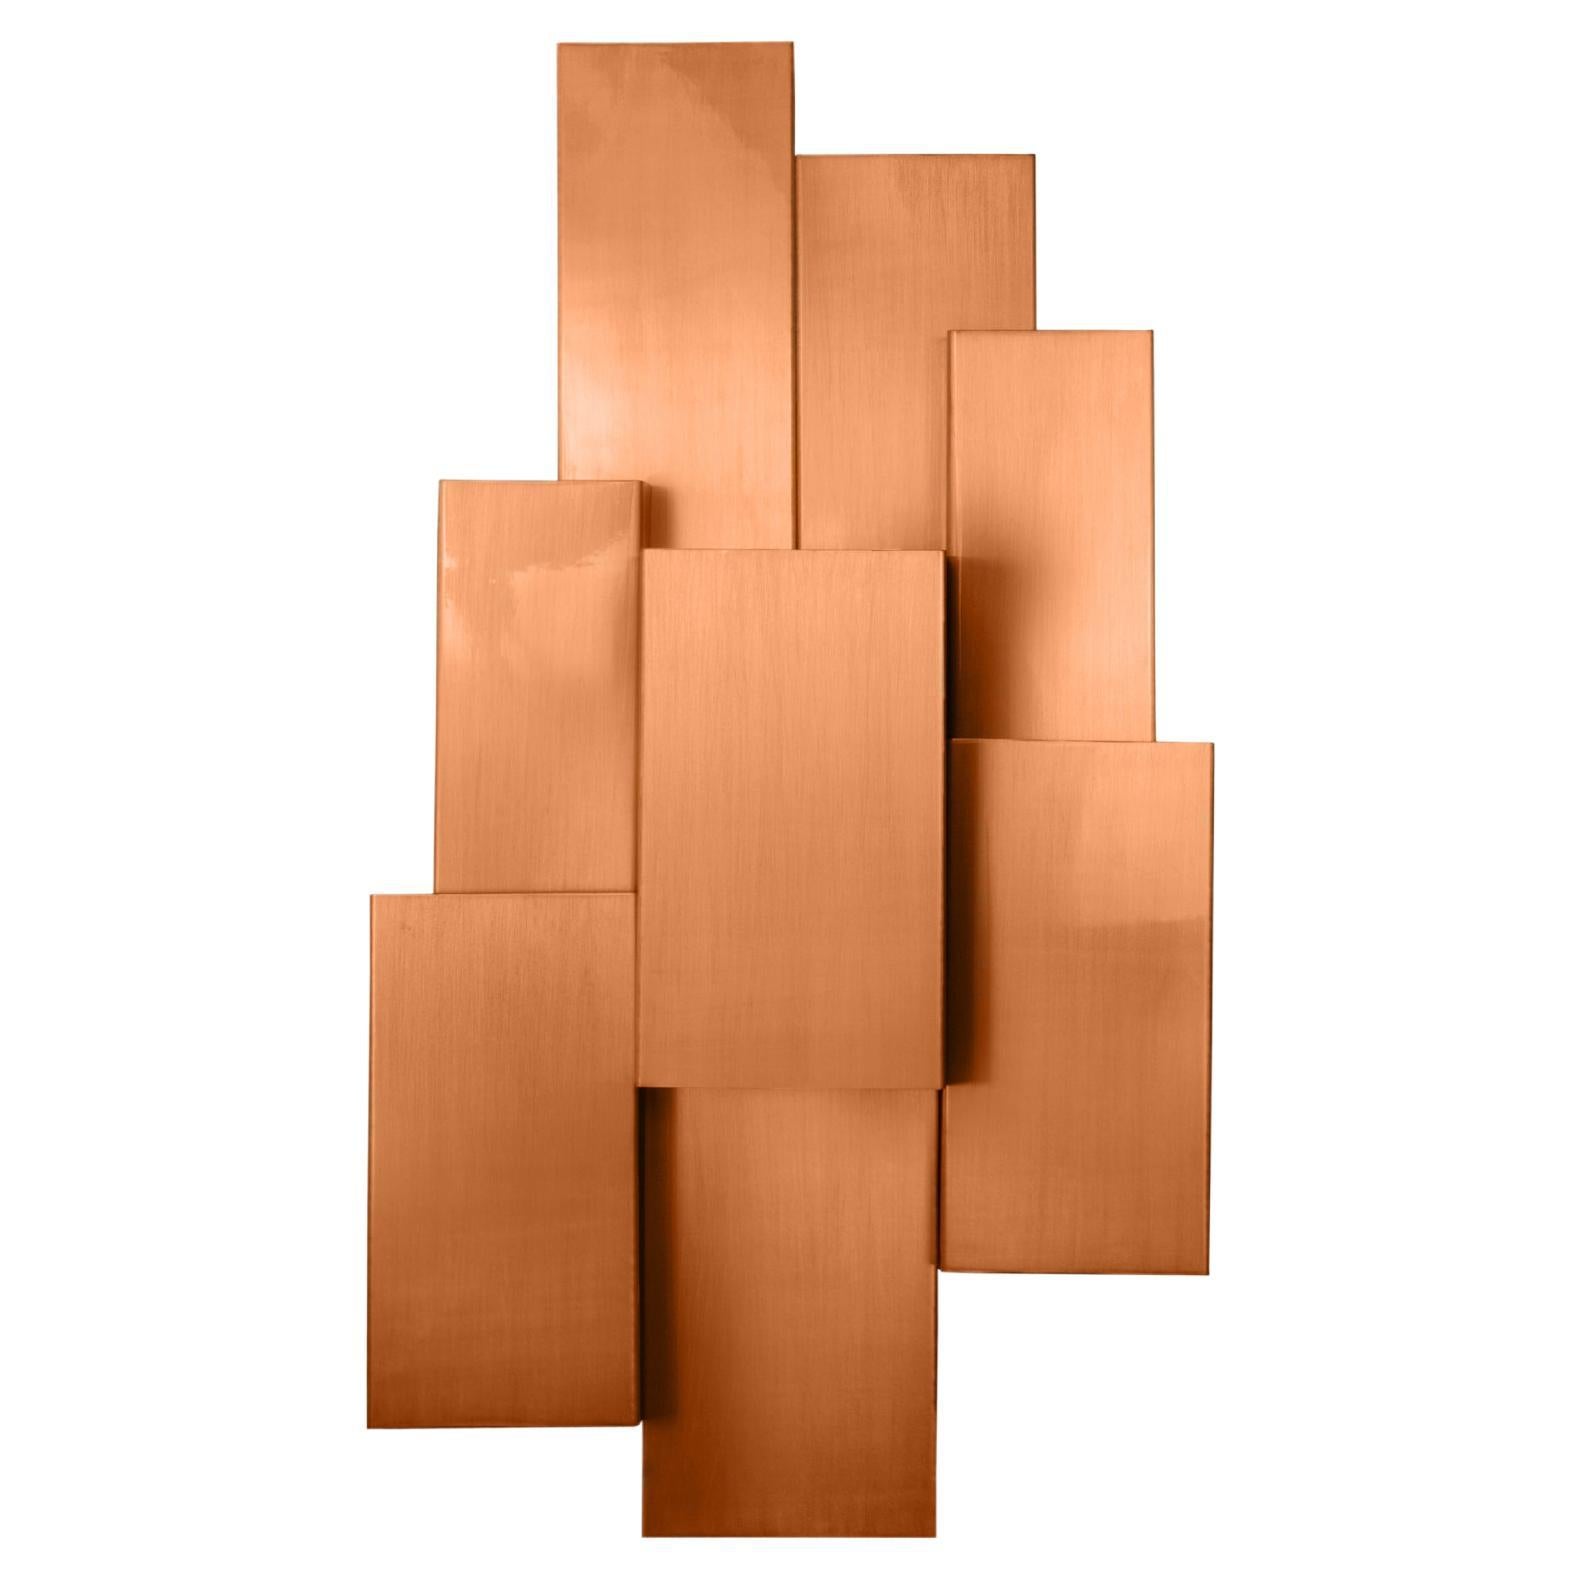 Inspiring Trees L Wall Lamp Brushed Copper, InsidherLand by Joana Santos Barbosa For Sale